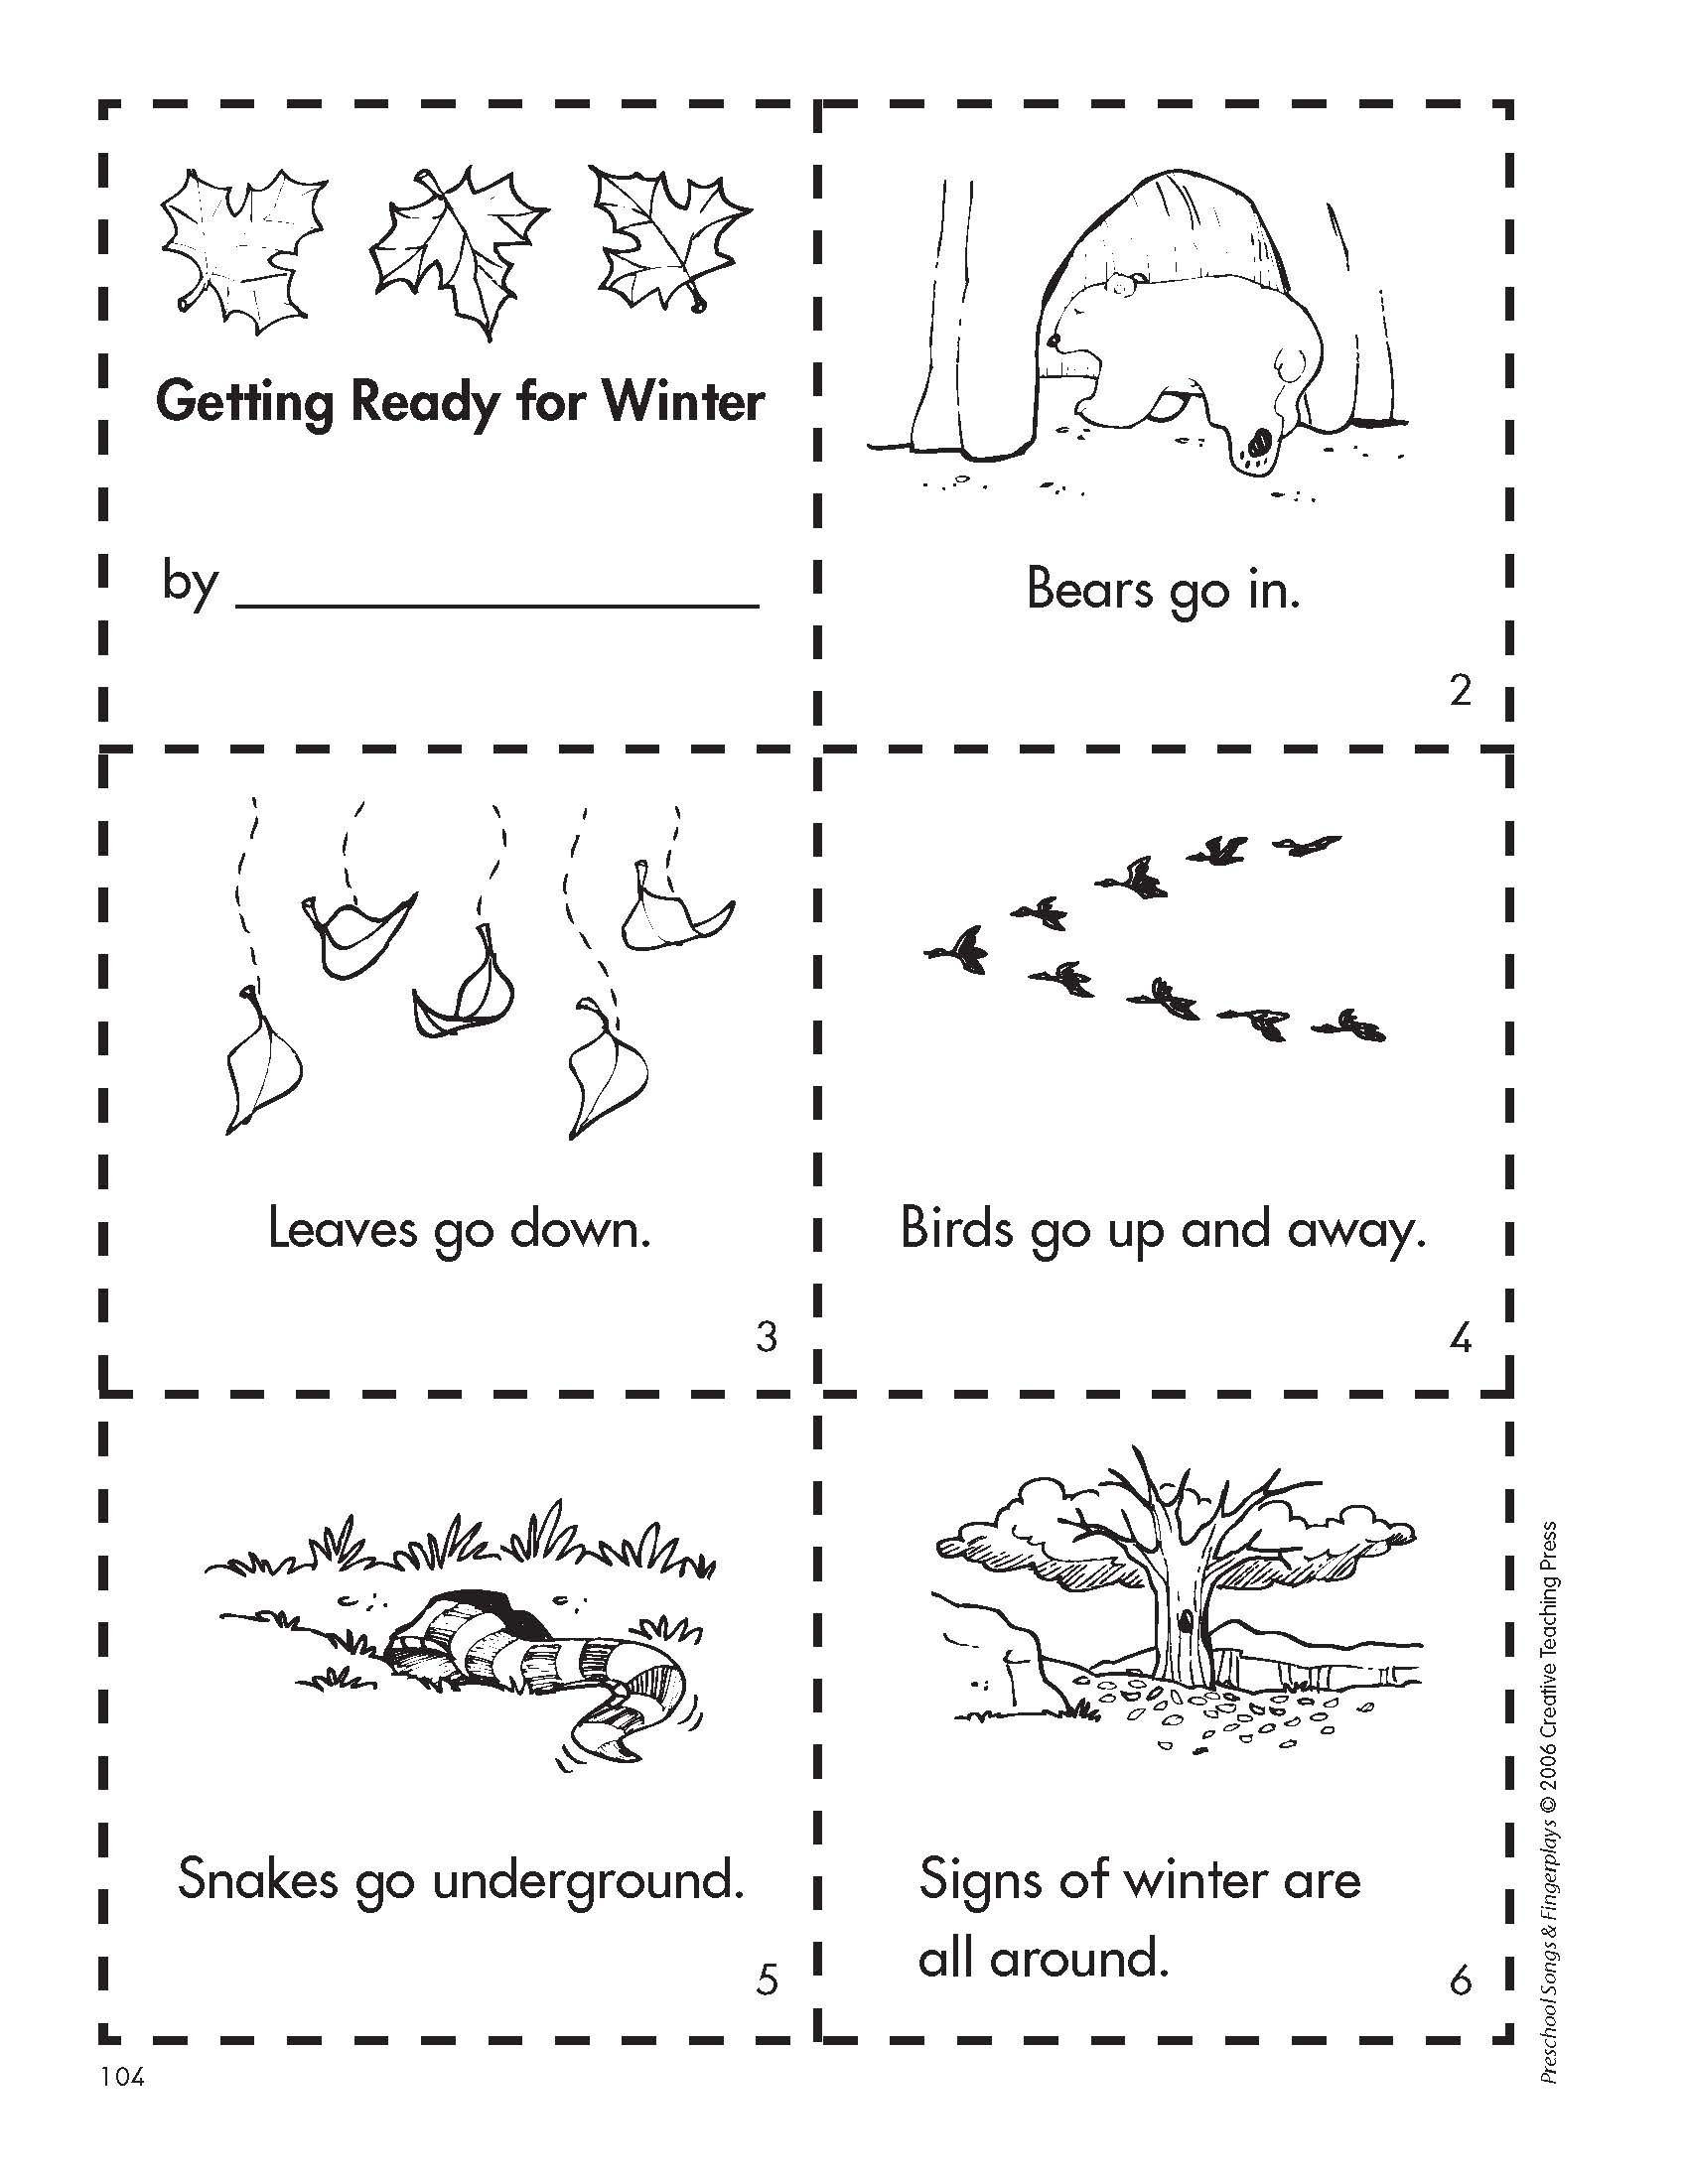 Hibernation Worksheets for Kindergarten Get Ready for Winter with This Free Minibook Reproducible